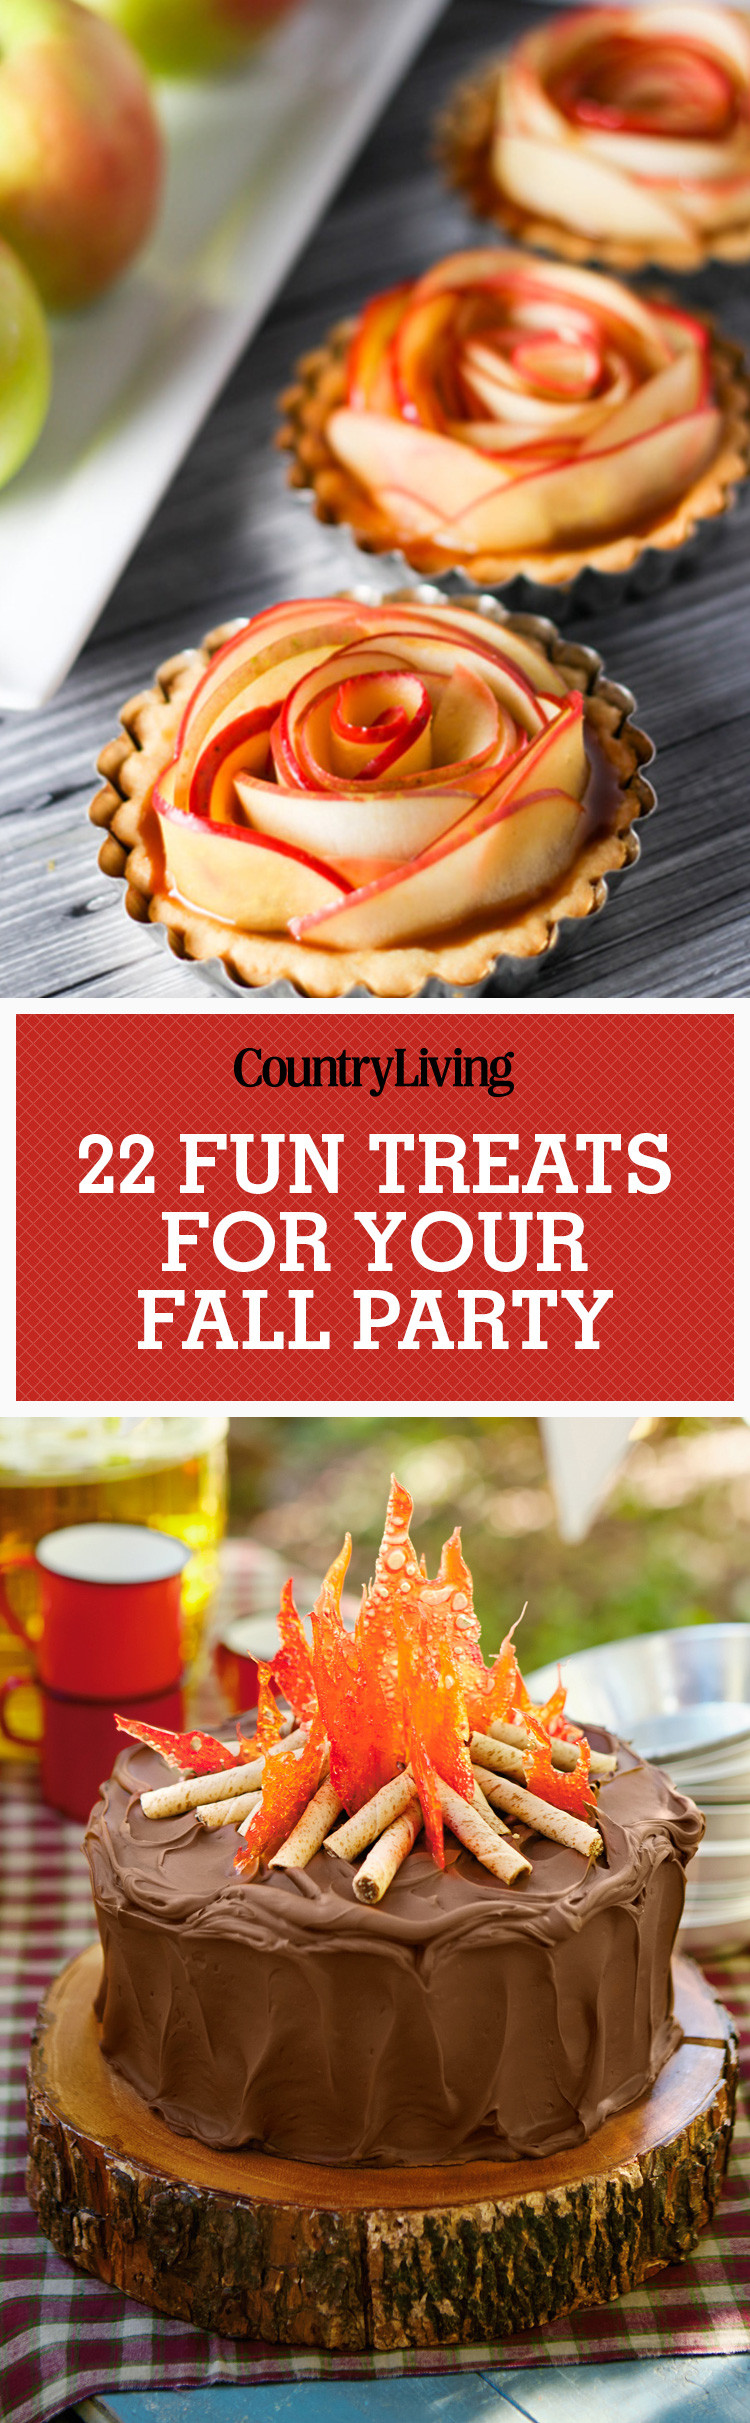 Recipes For Fall Desserts
 35 Easy Fall Dessert Recipes Best Treats for Autumn Parties